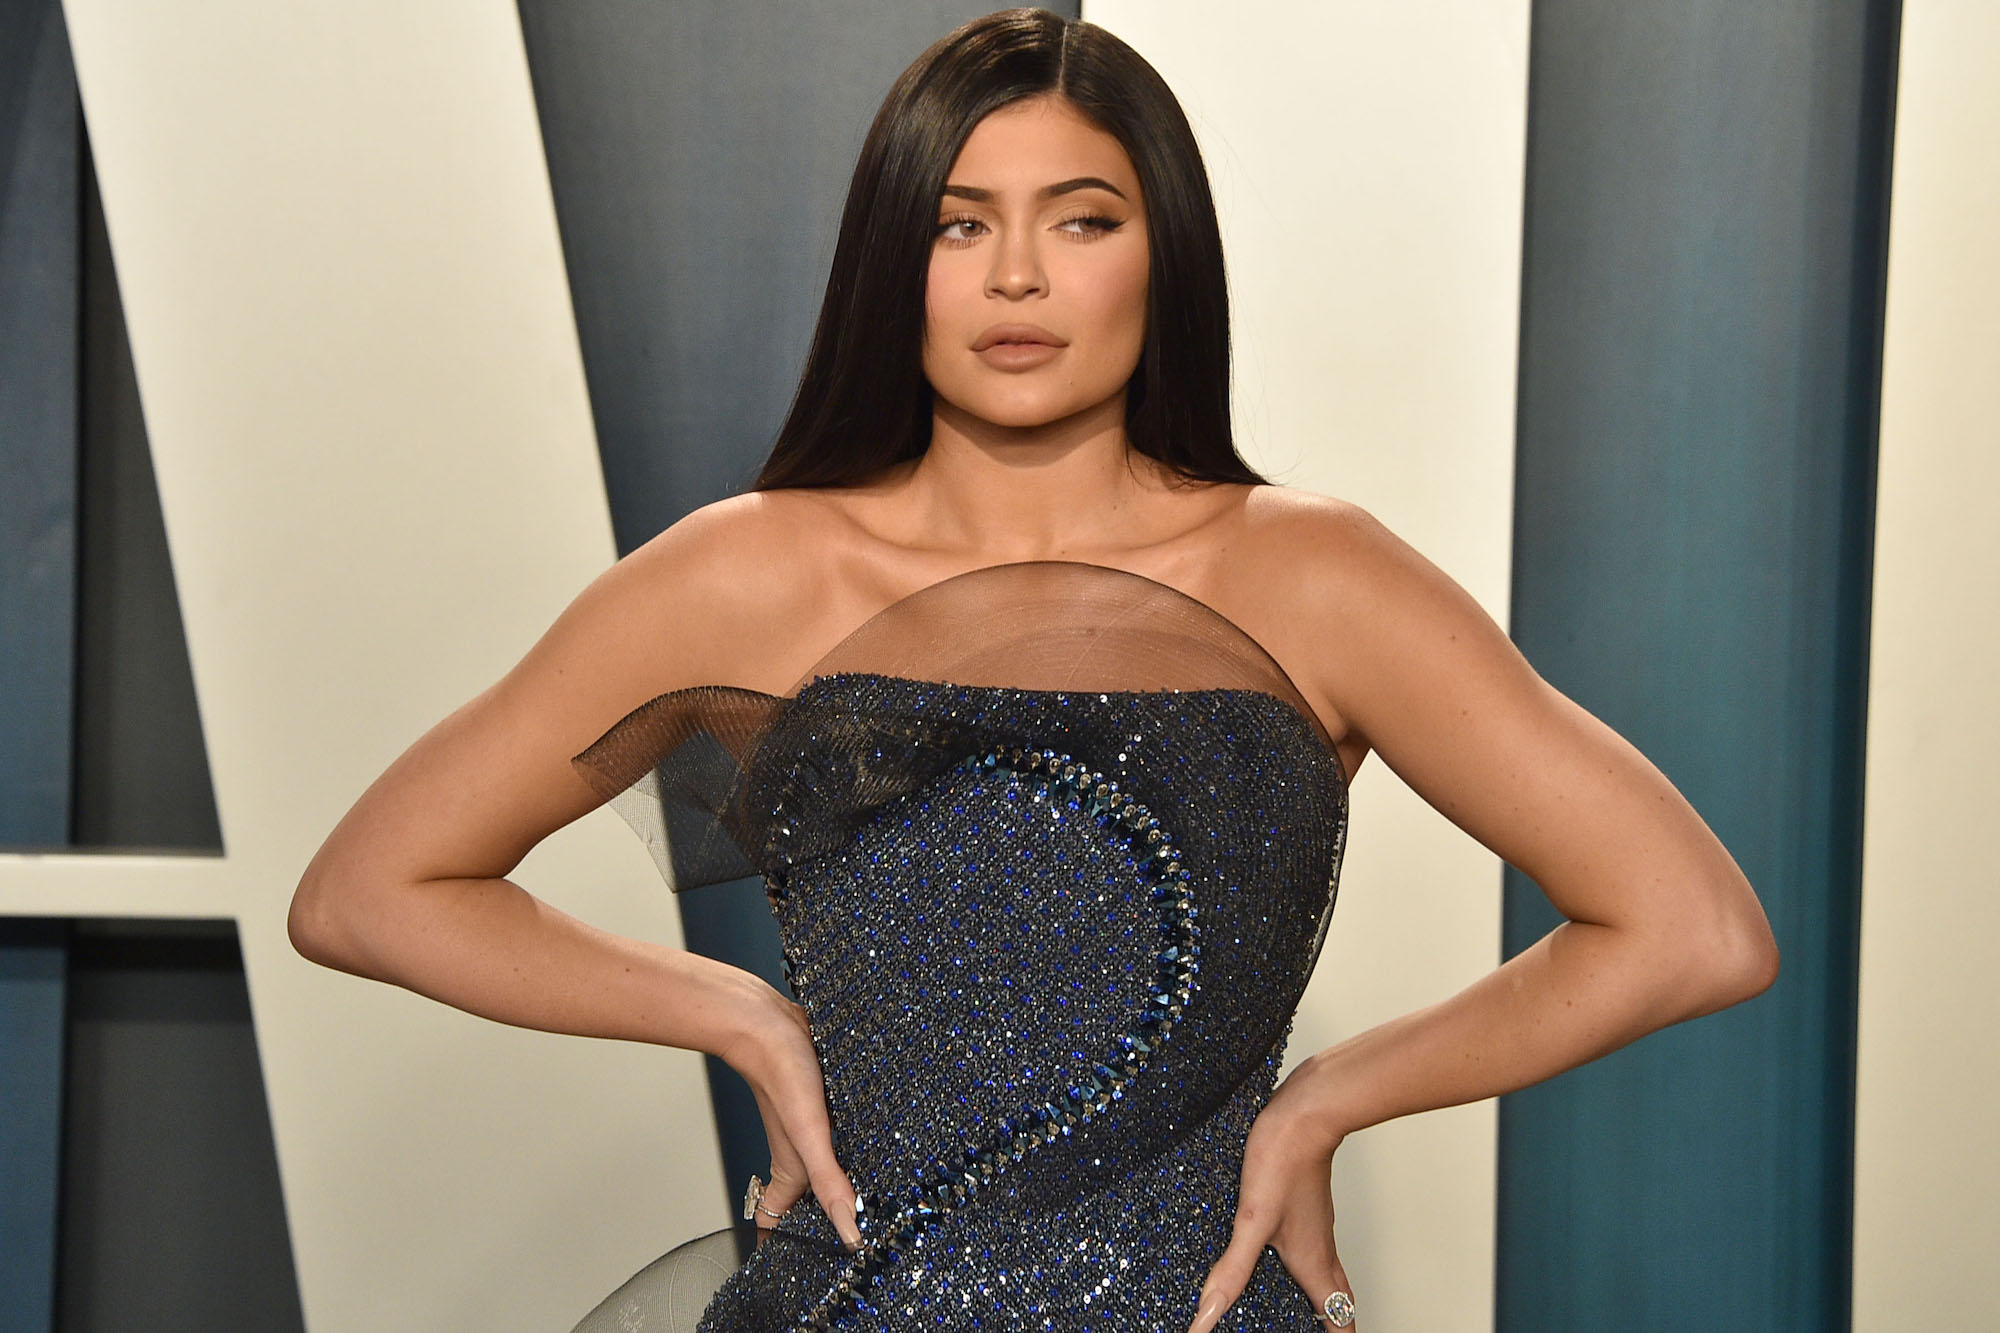 Kylie Jenner slightly smiling wearing a glittery blue dress with her hands on her hips